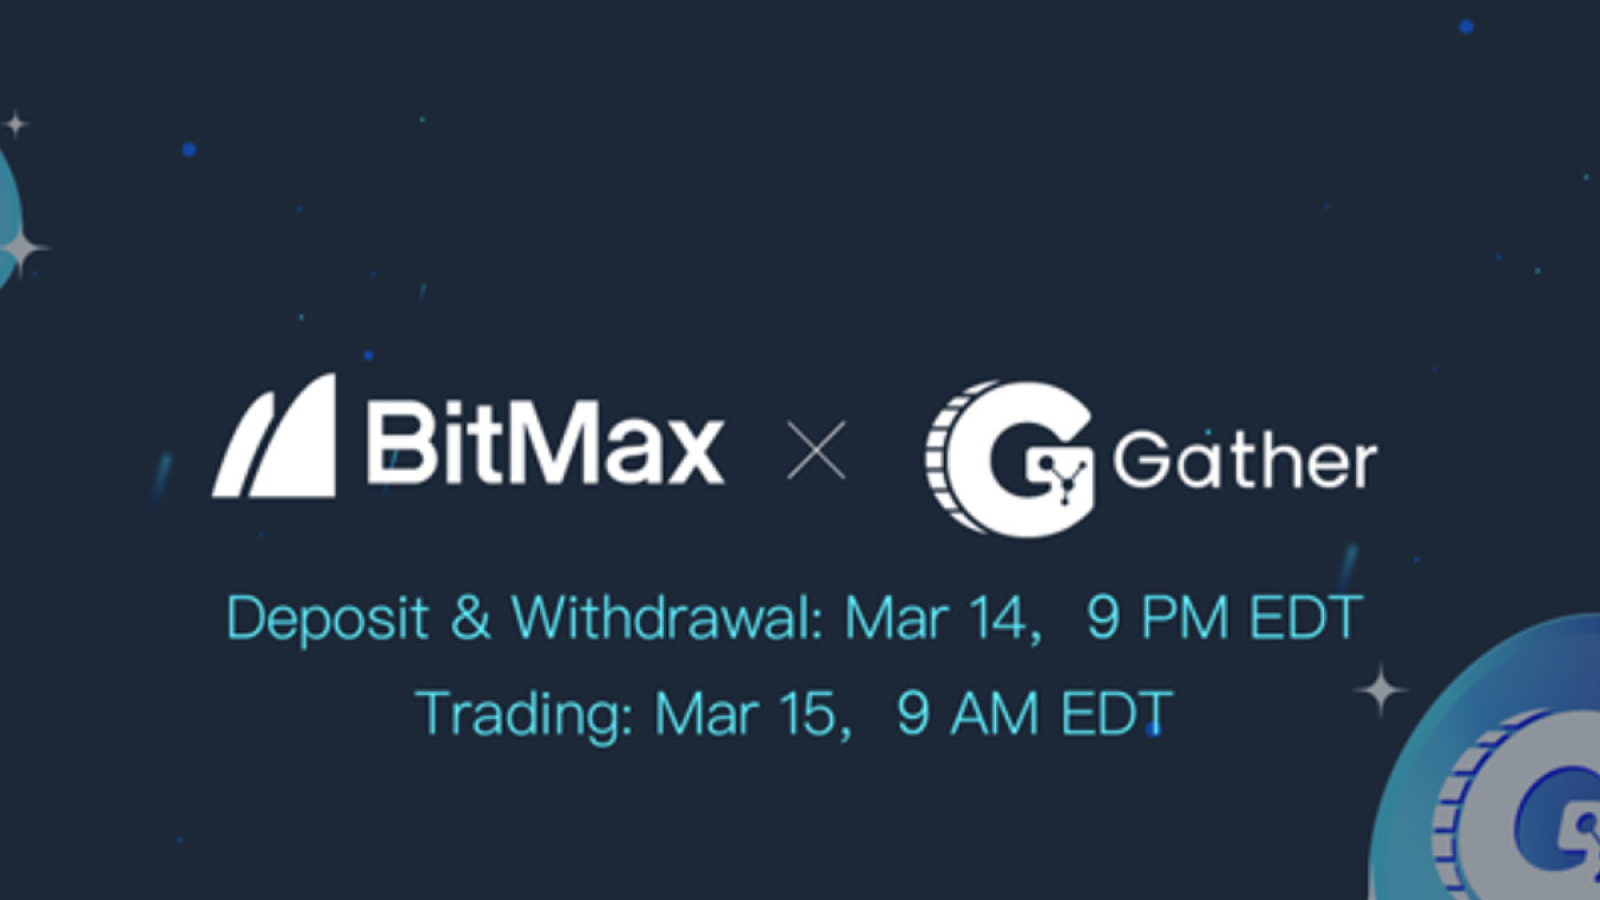 Gather To List GTH Token With BitMax